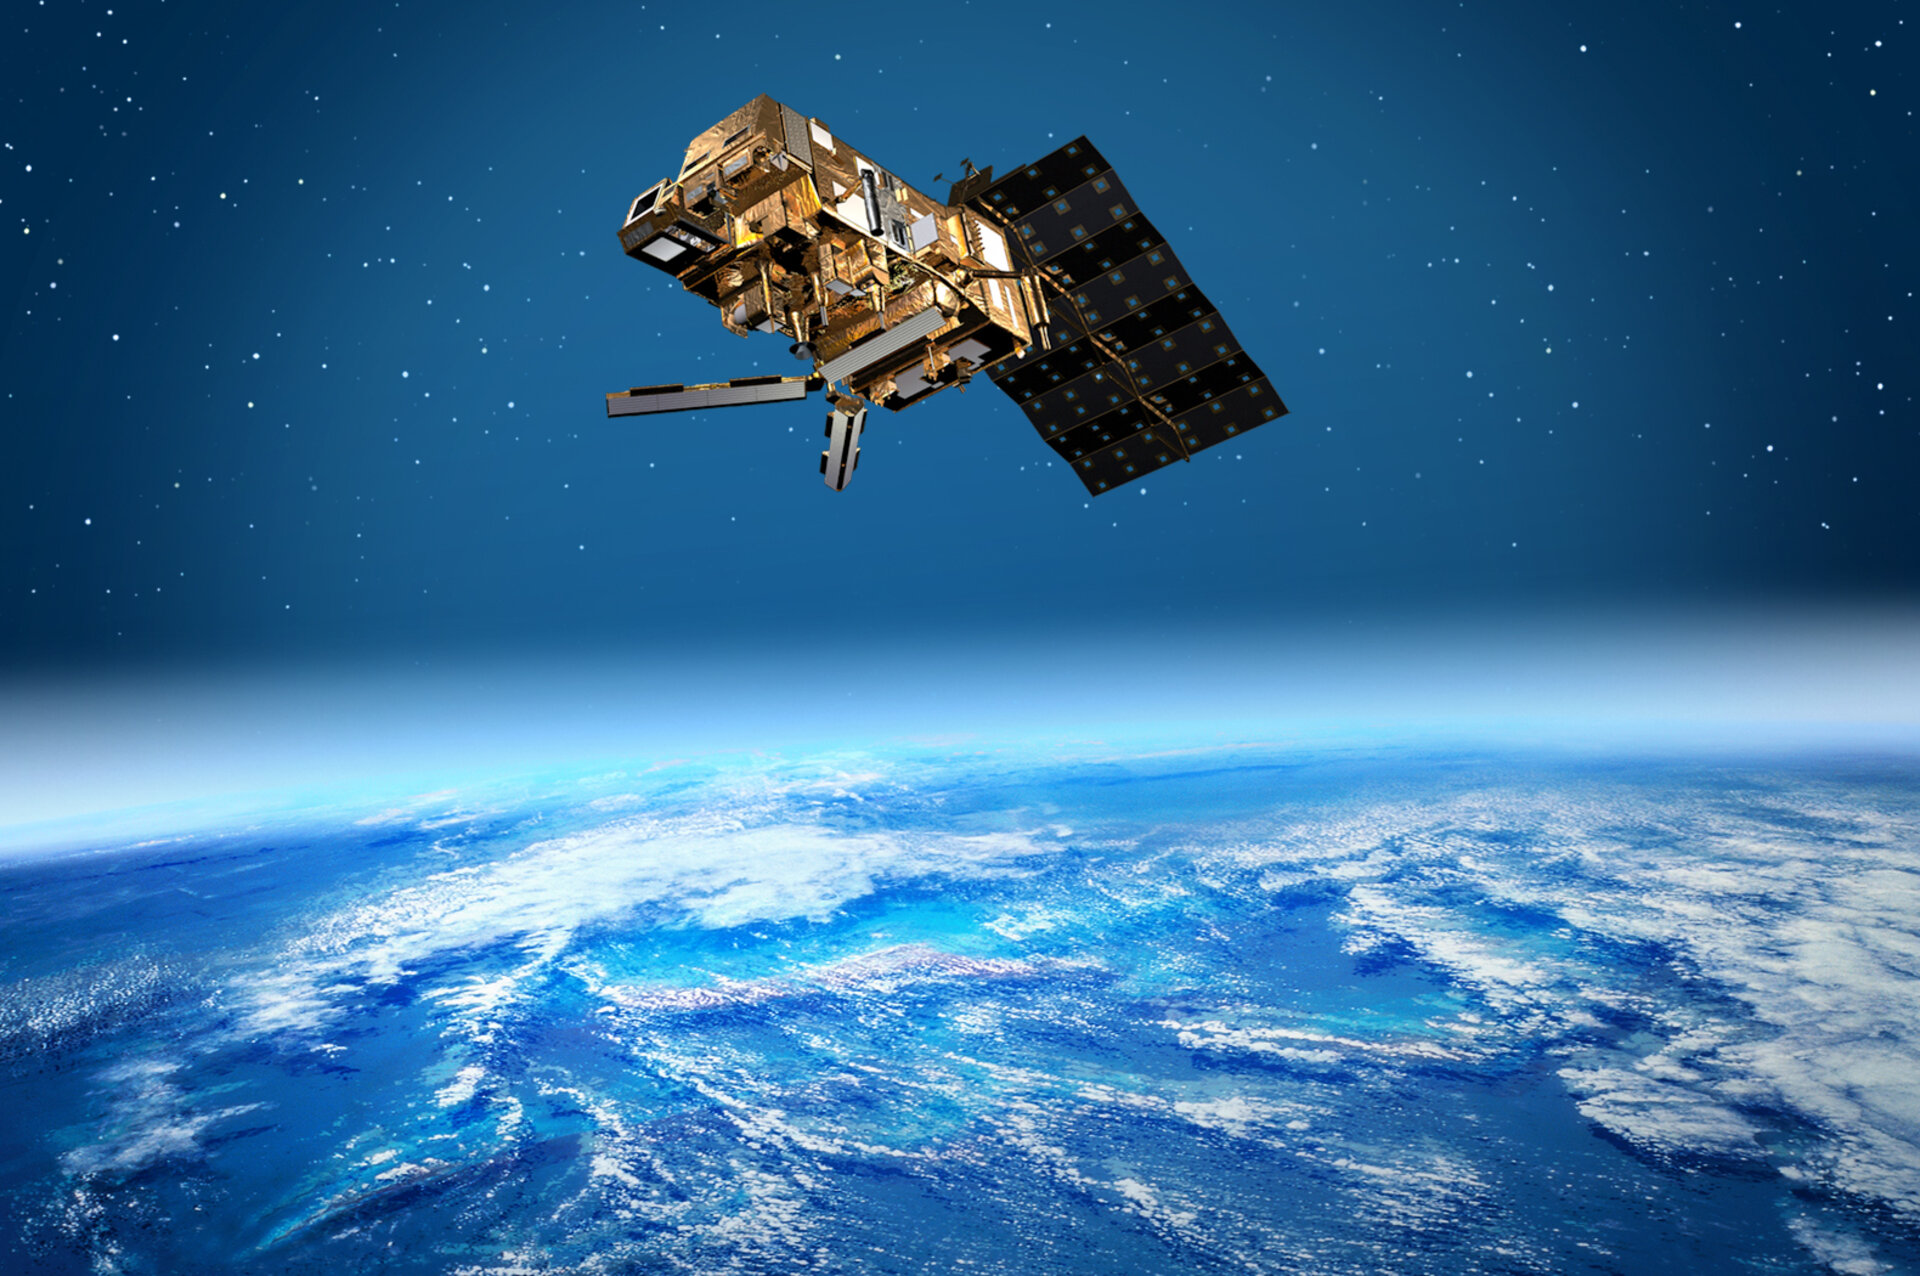 Artist's impression of MetOp-A